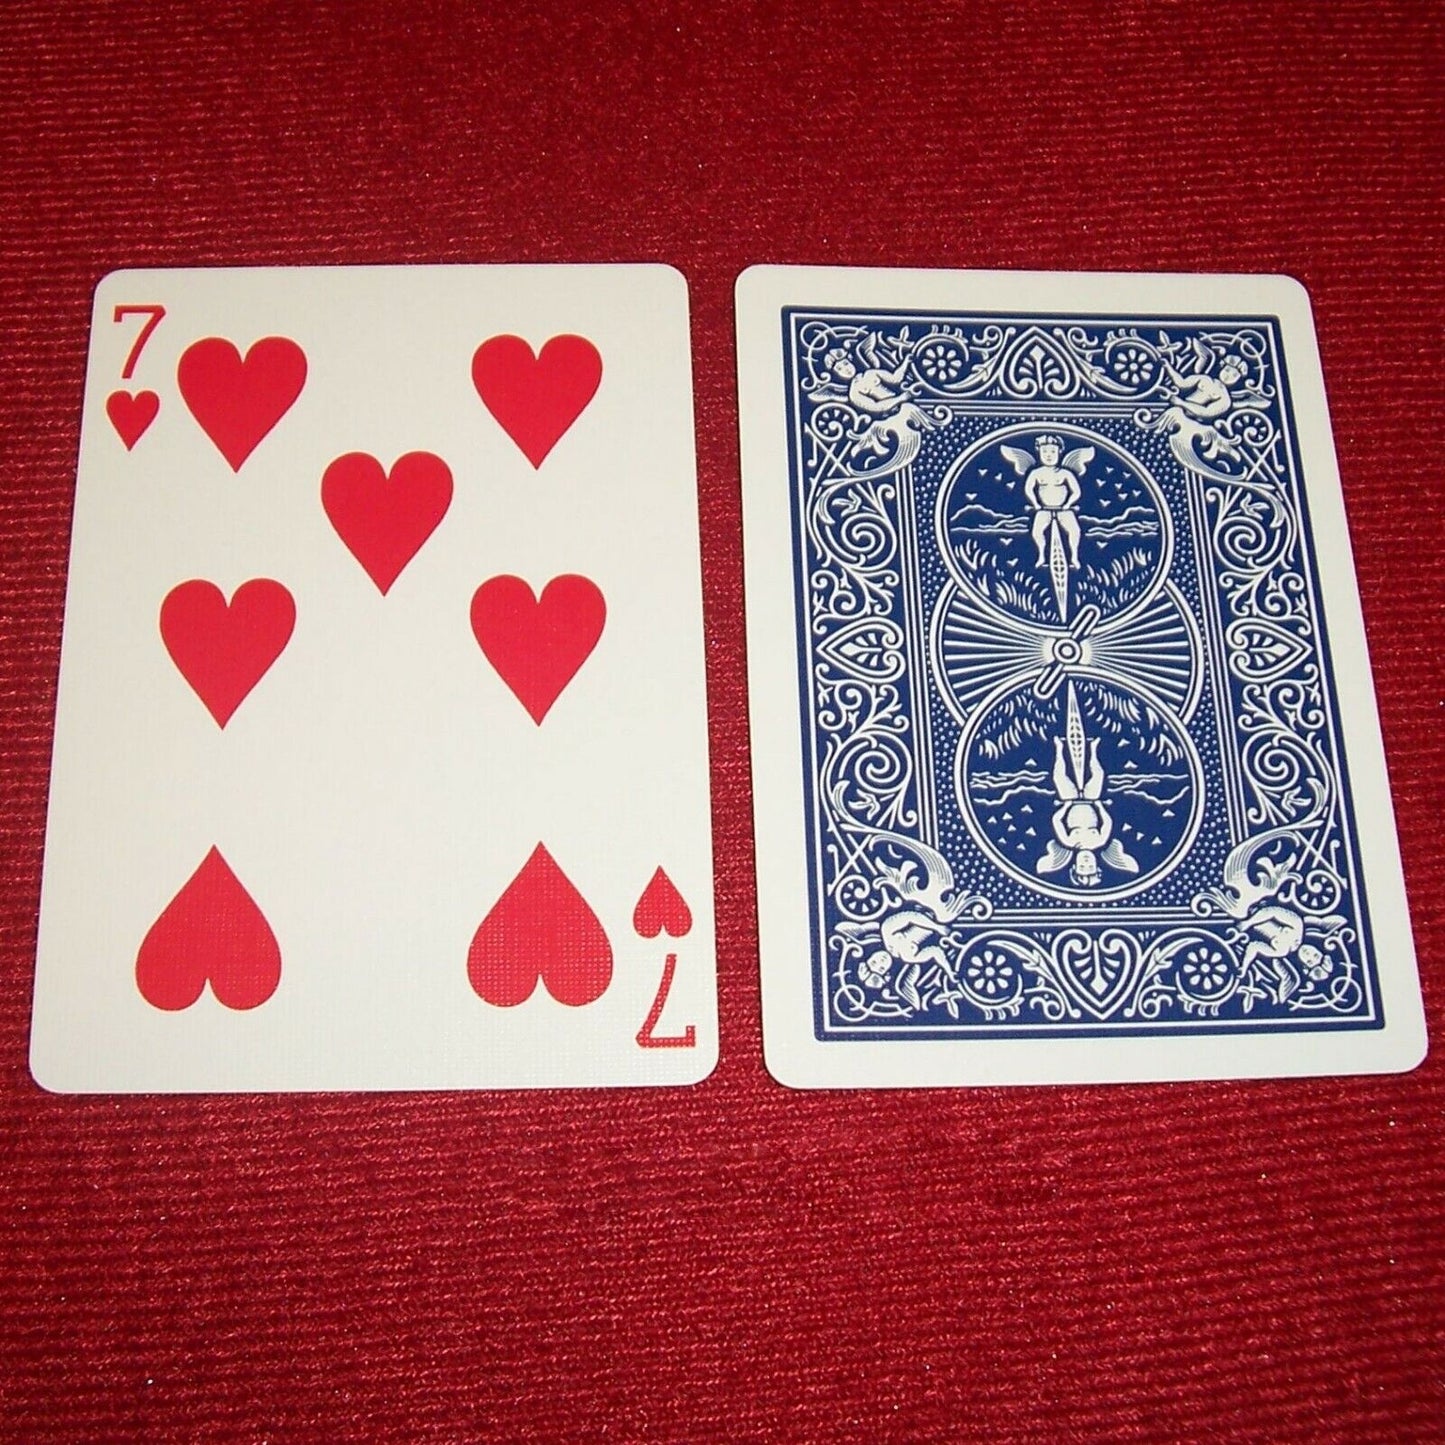 Stutter Deck - Bicycle® Cards - One way forcing deck Blue Backed